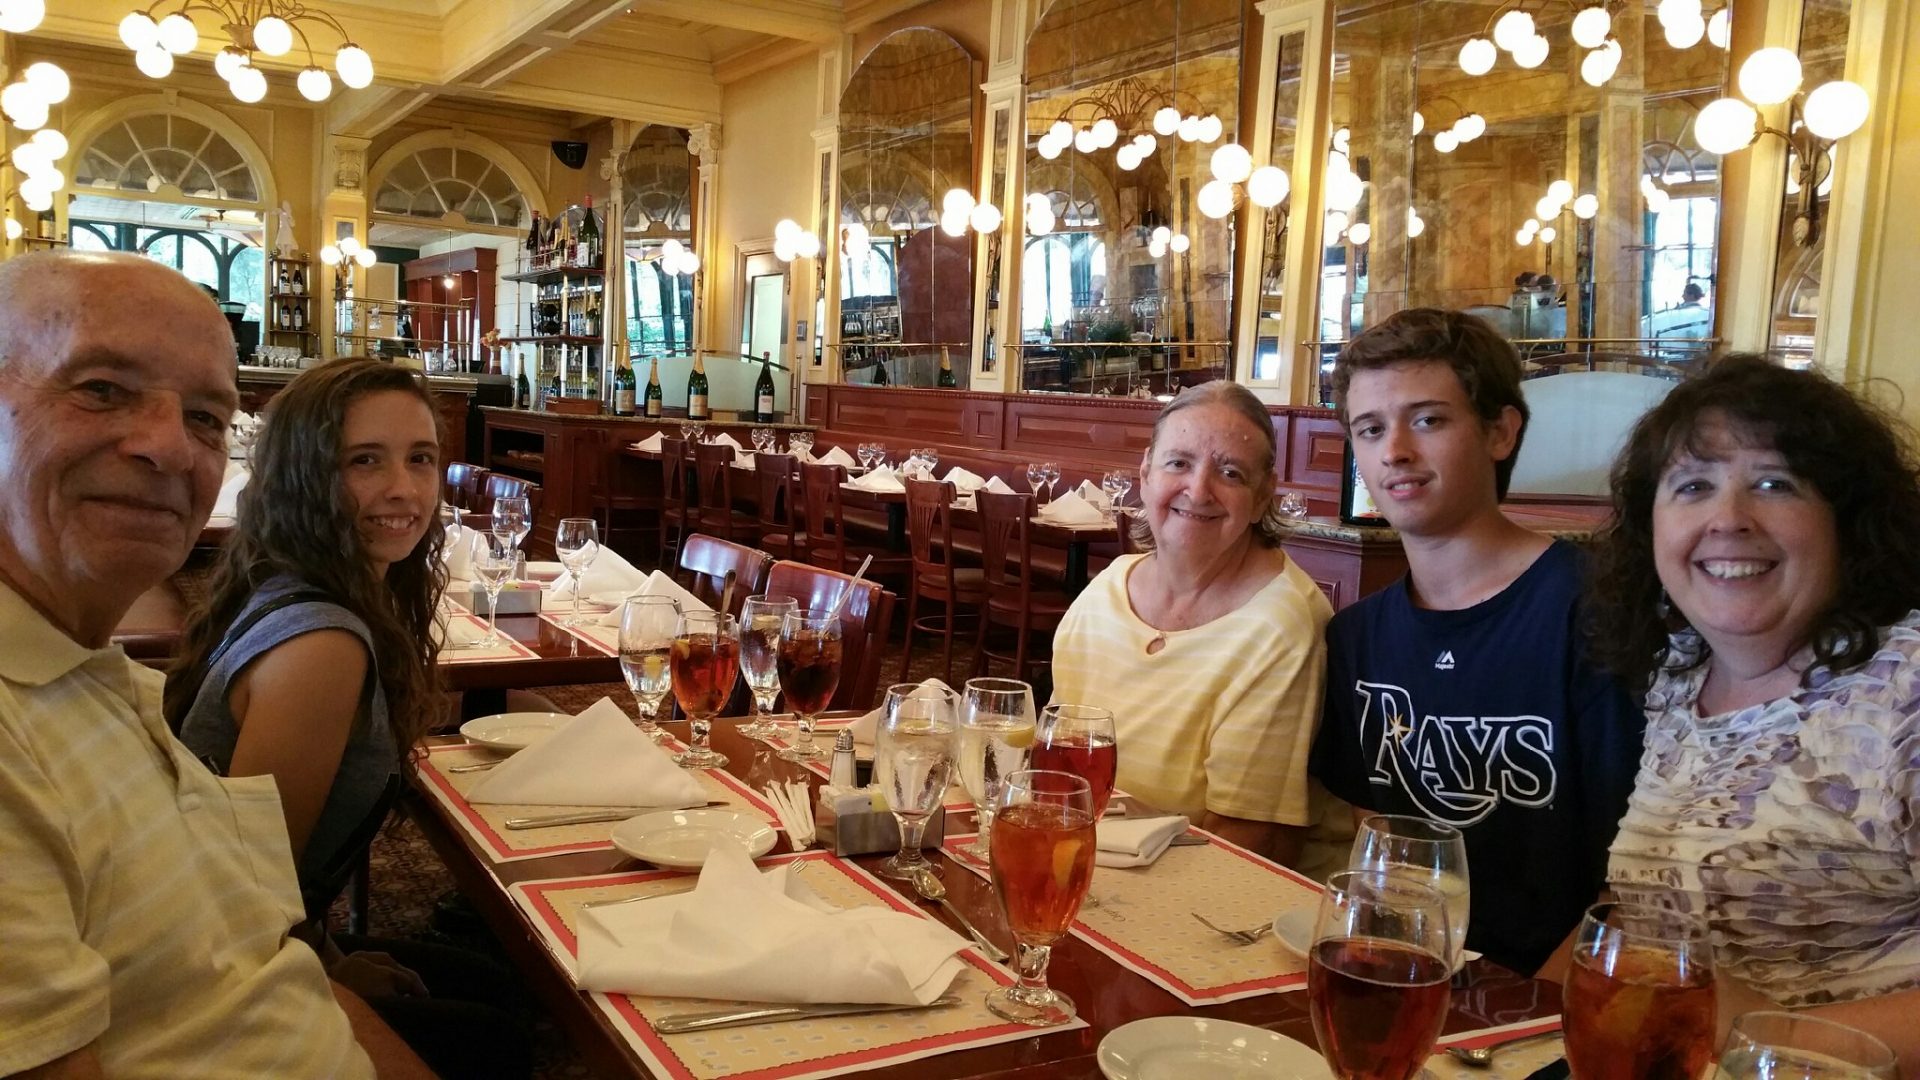 Dinner at Chefs de France in Epcot